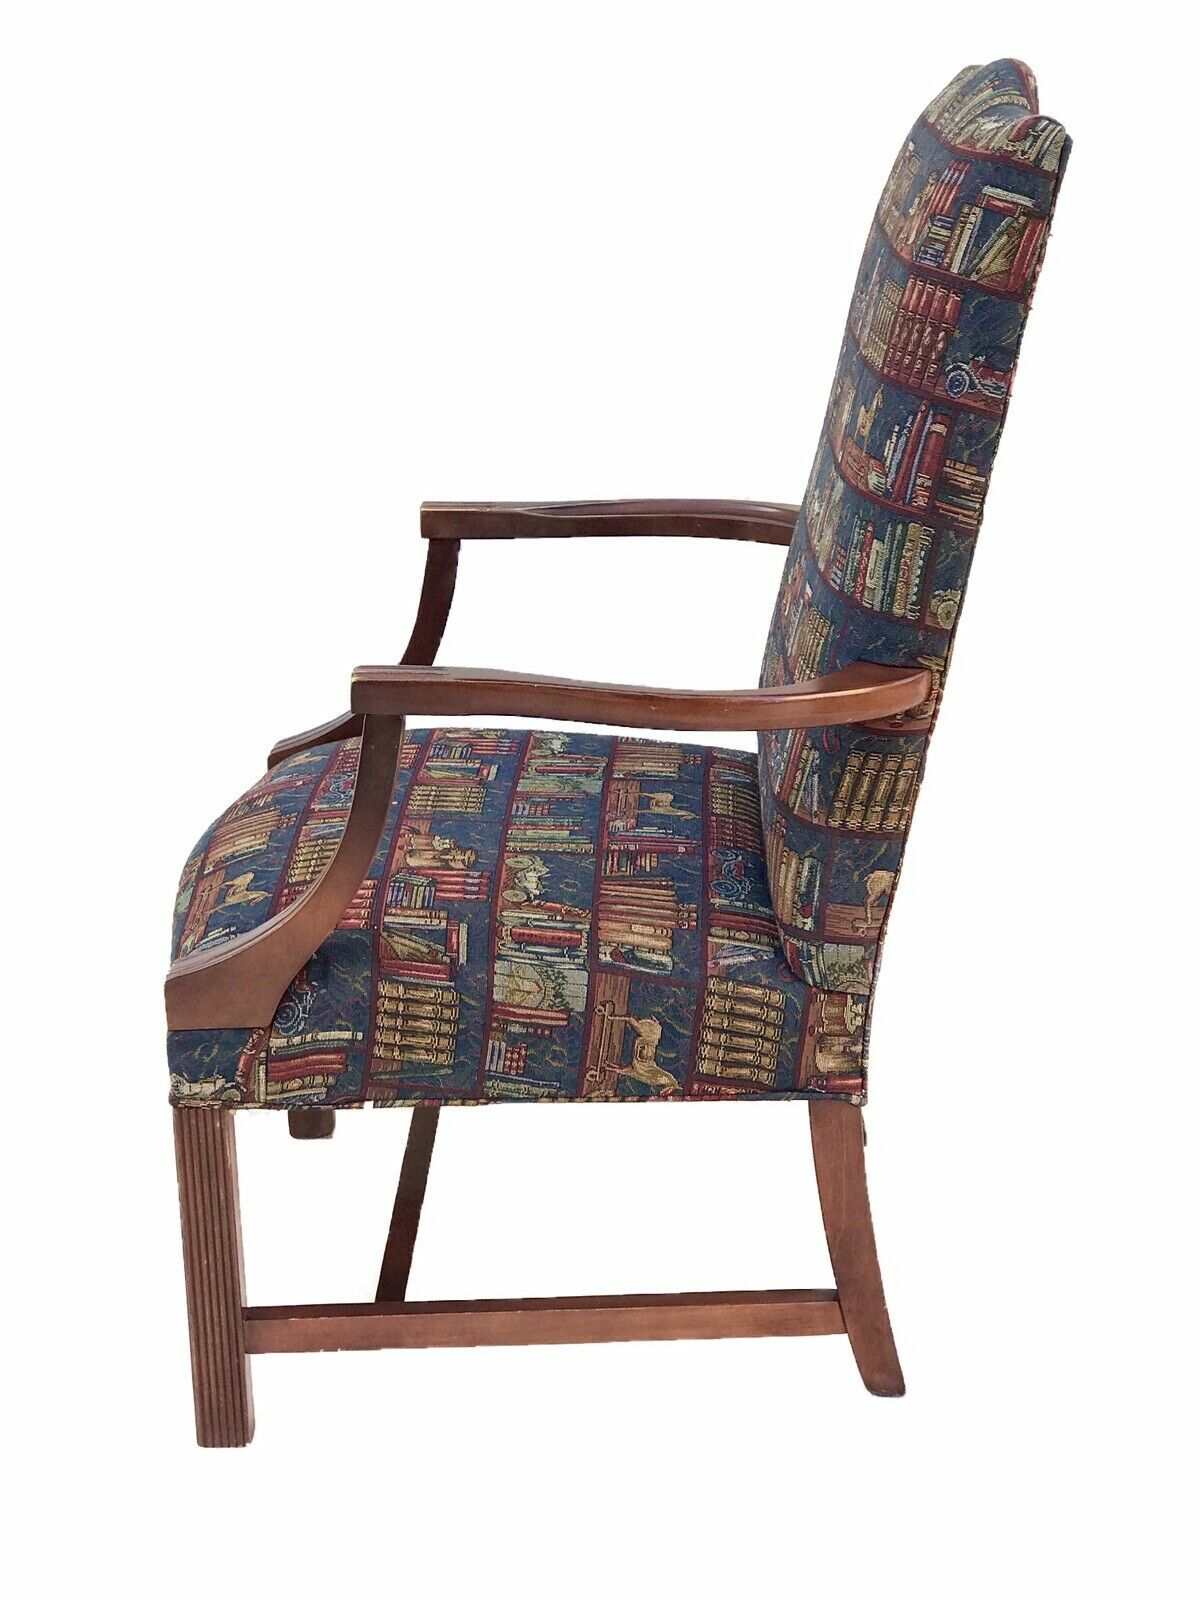 20TH C CHIPPENDALE ANTIQUE STYLE LIBRARY ARM CHAIR / LOLLING CHAIR